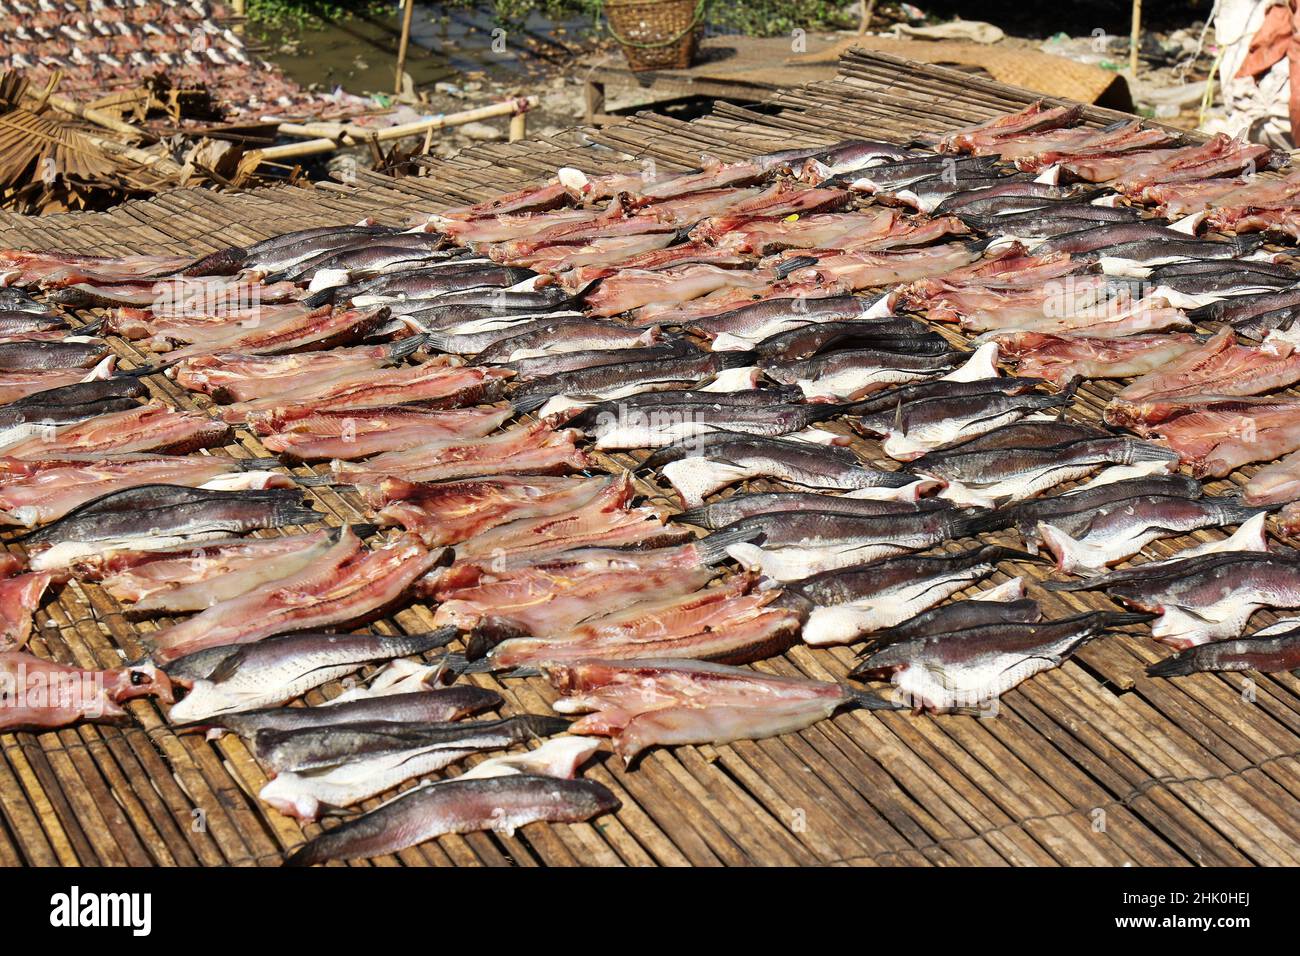 Fish production place drying fish at the river side, Myanmar Stock Photo